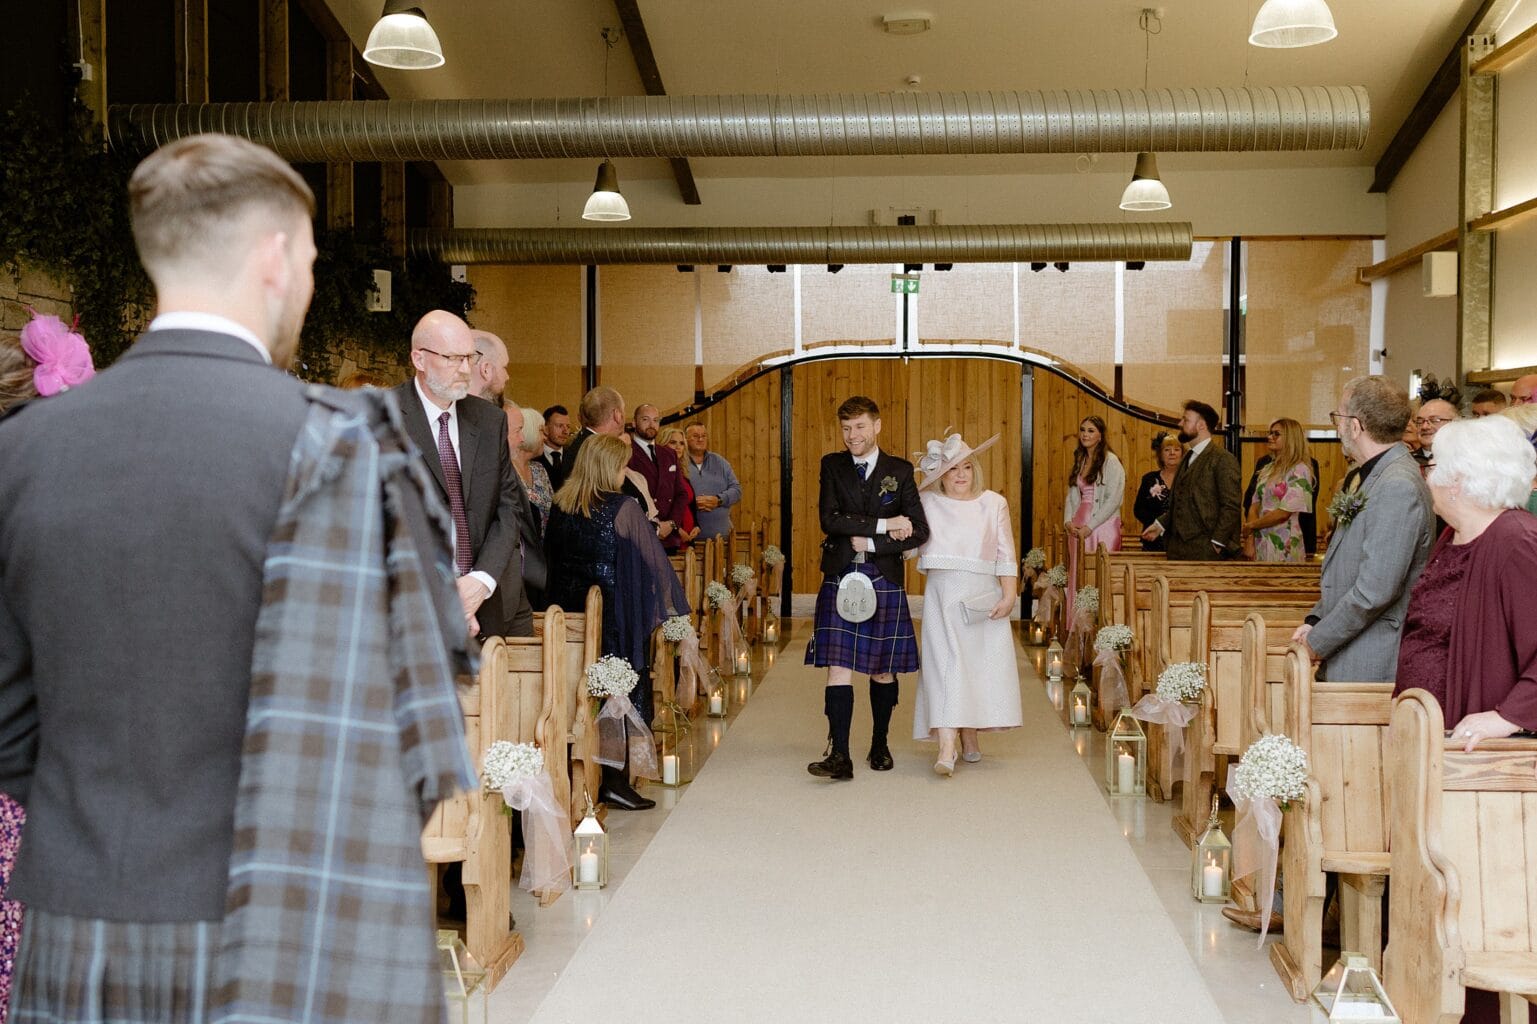 guests watch as the mother of the bride walks down the aisle arm in arm with a groomsman at barn wedding venues west lothian scotland